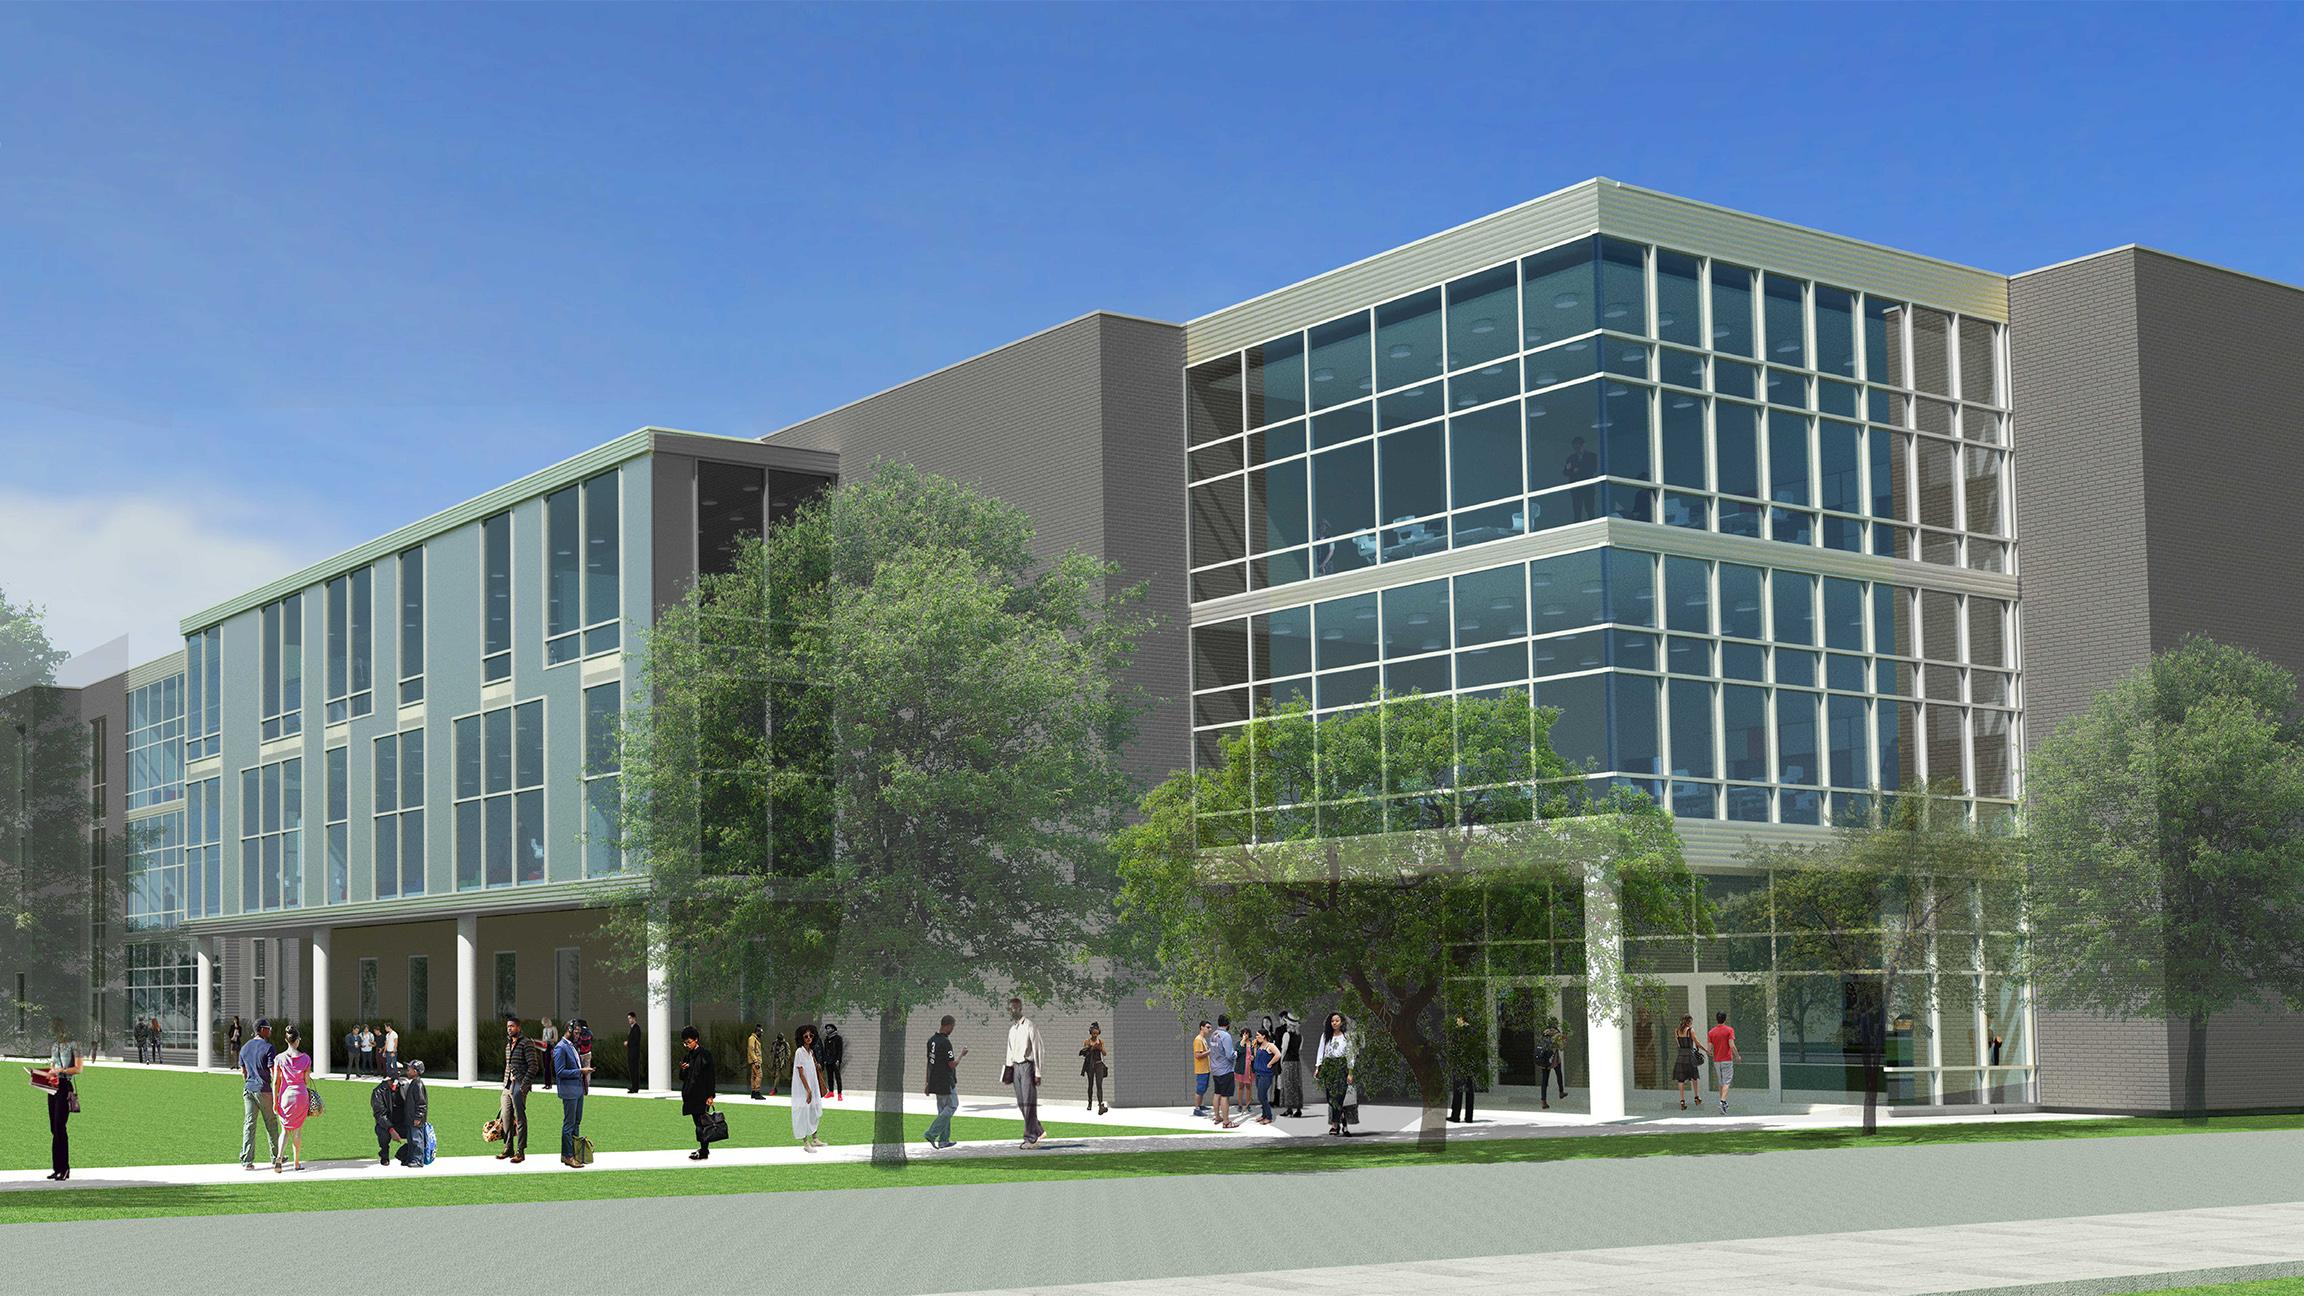 A new Englewood neighborhood school will be opened on the site of Robeson High School for the 2019-20 school year. (Rendering courtesy of Chicago Public Schools)